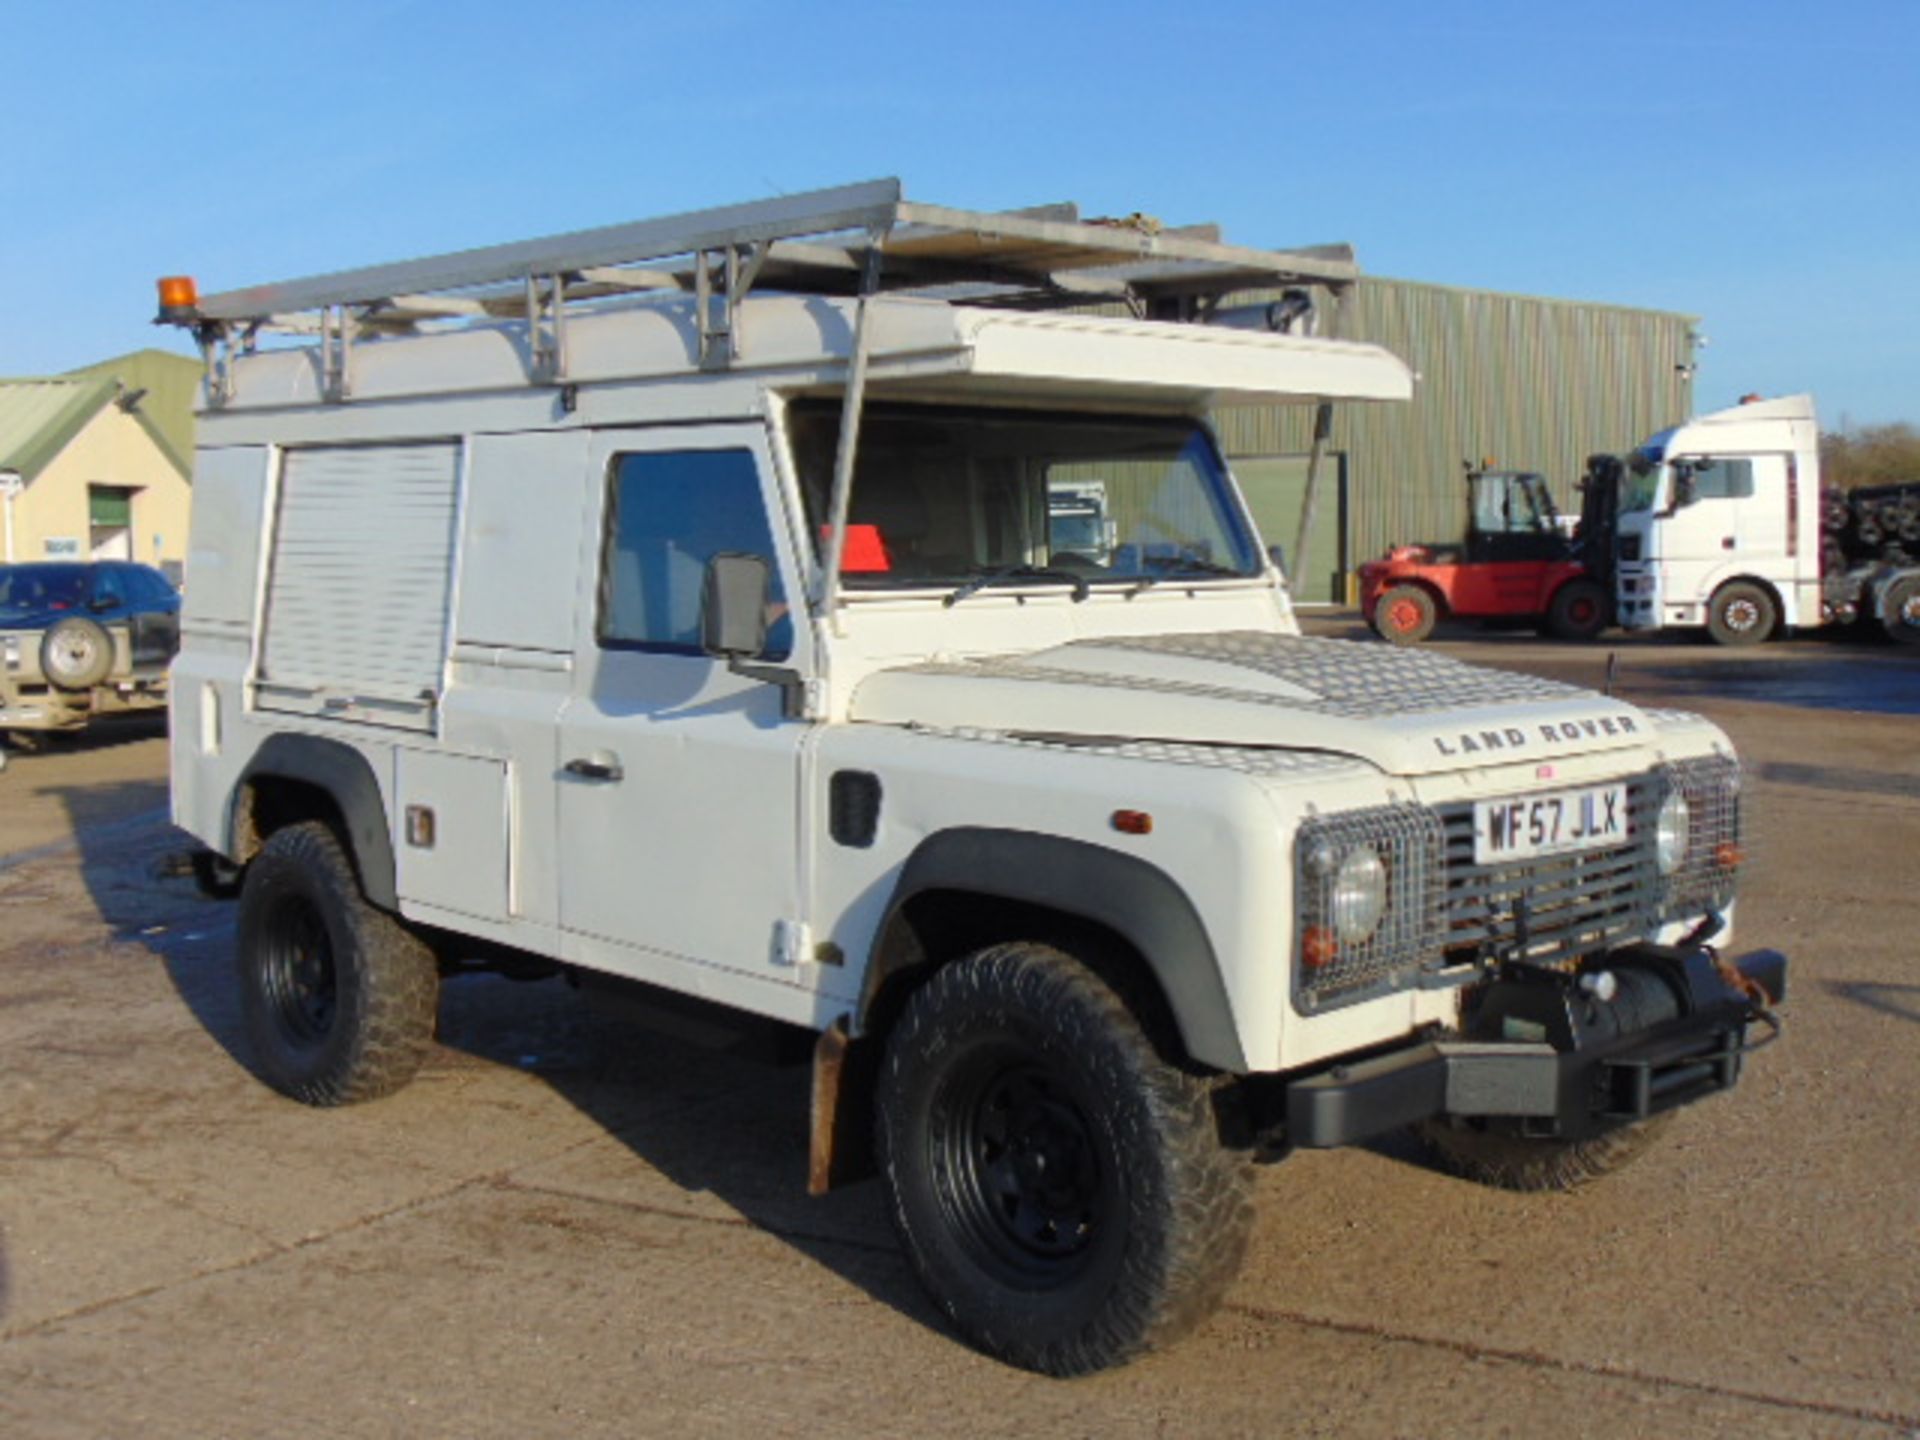 2007 Land Rover Defender 110 Puma Hardtop 4x4 Special Utility (Mobile Workshop) complete with Winch